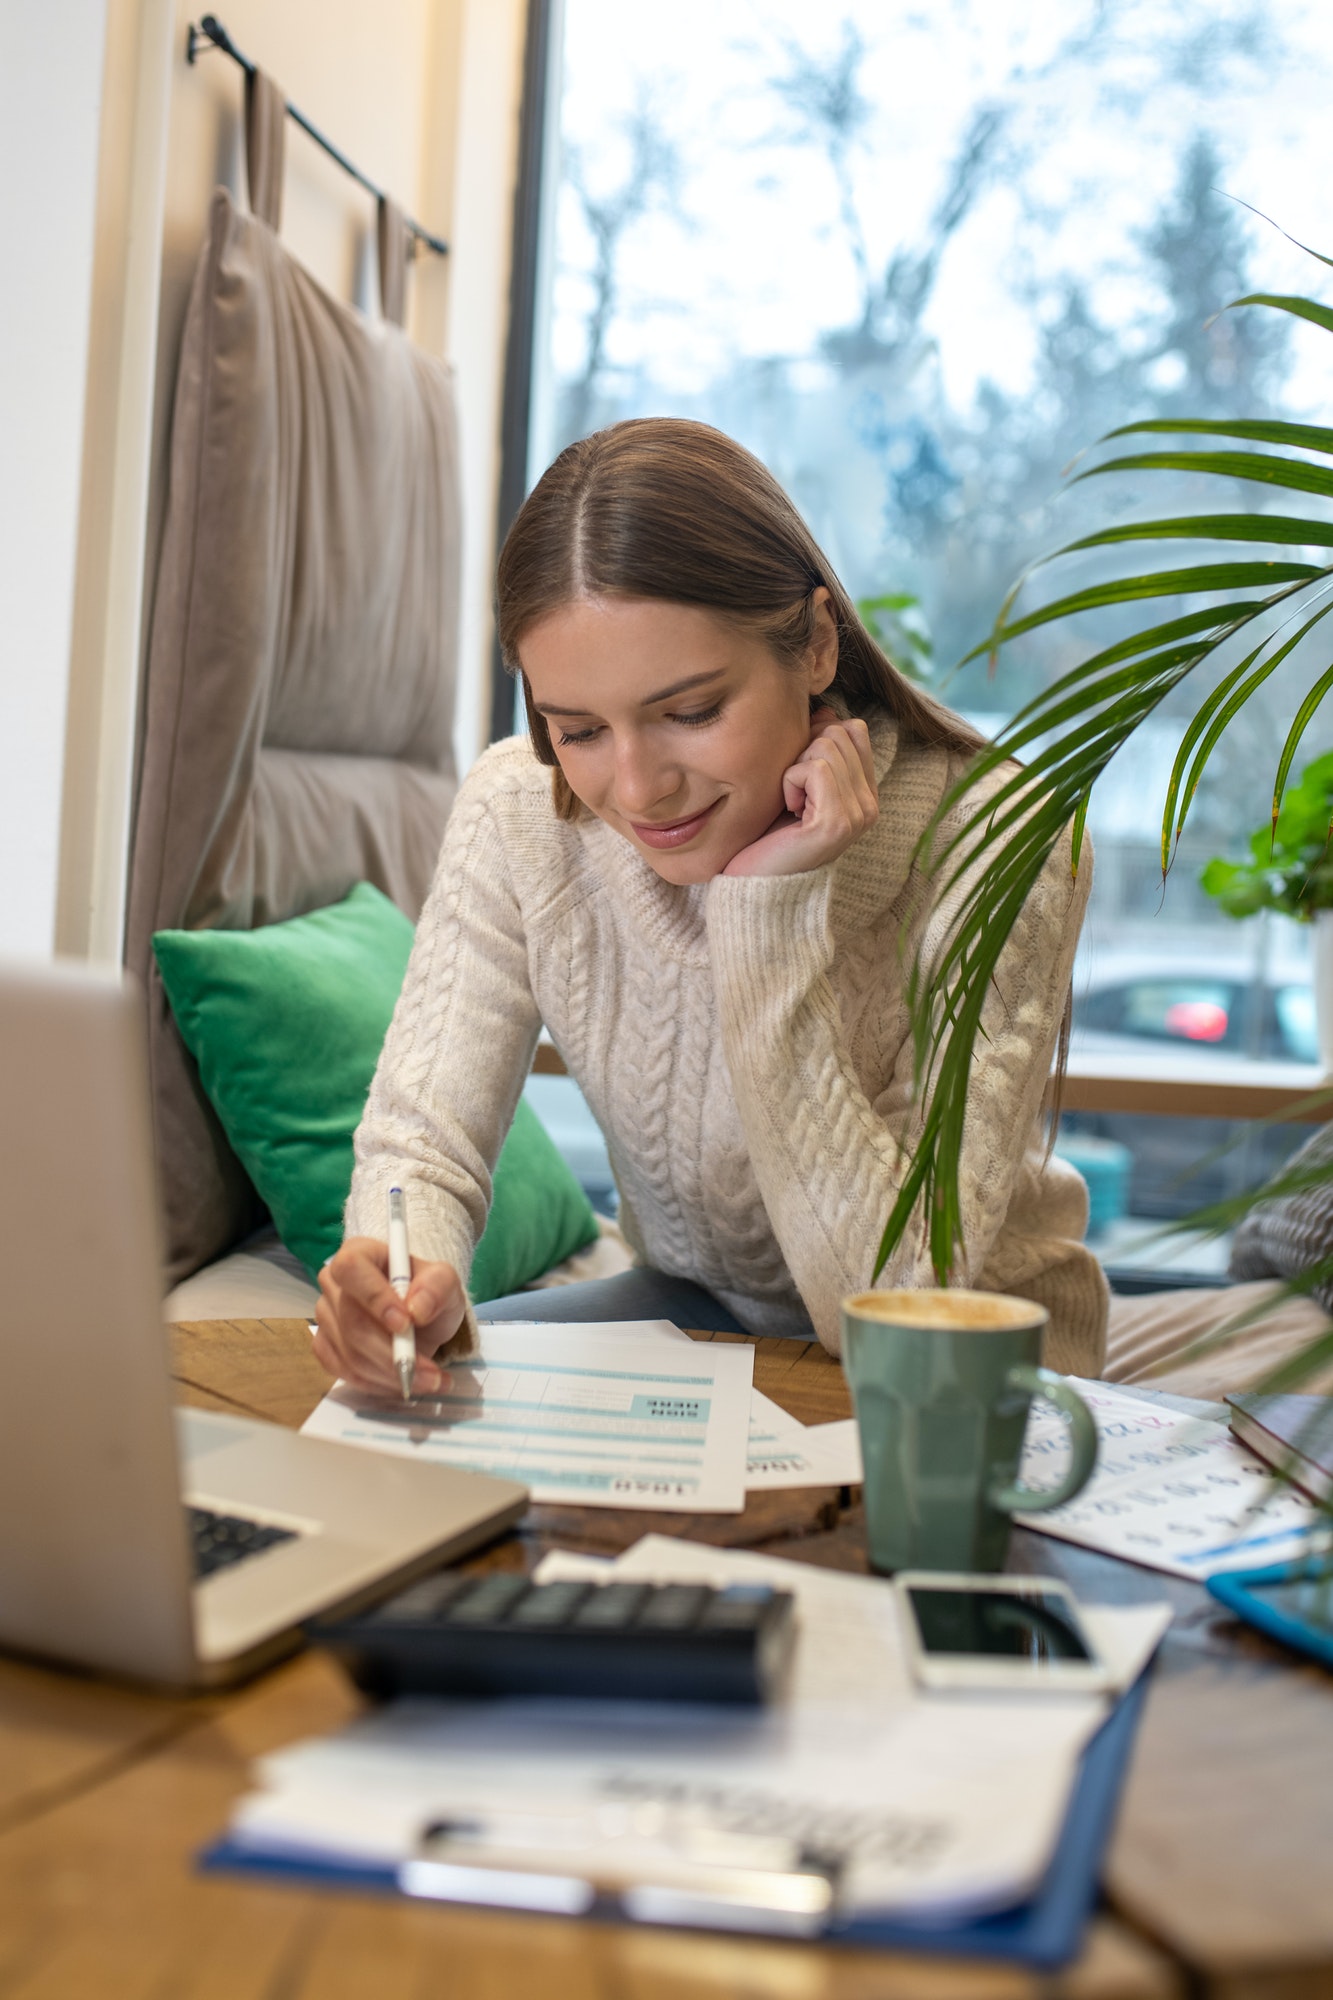 Concentrated woman calculating taxes and expenses for her business